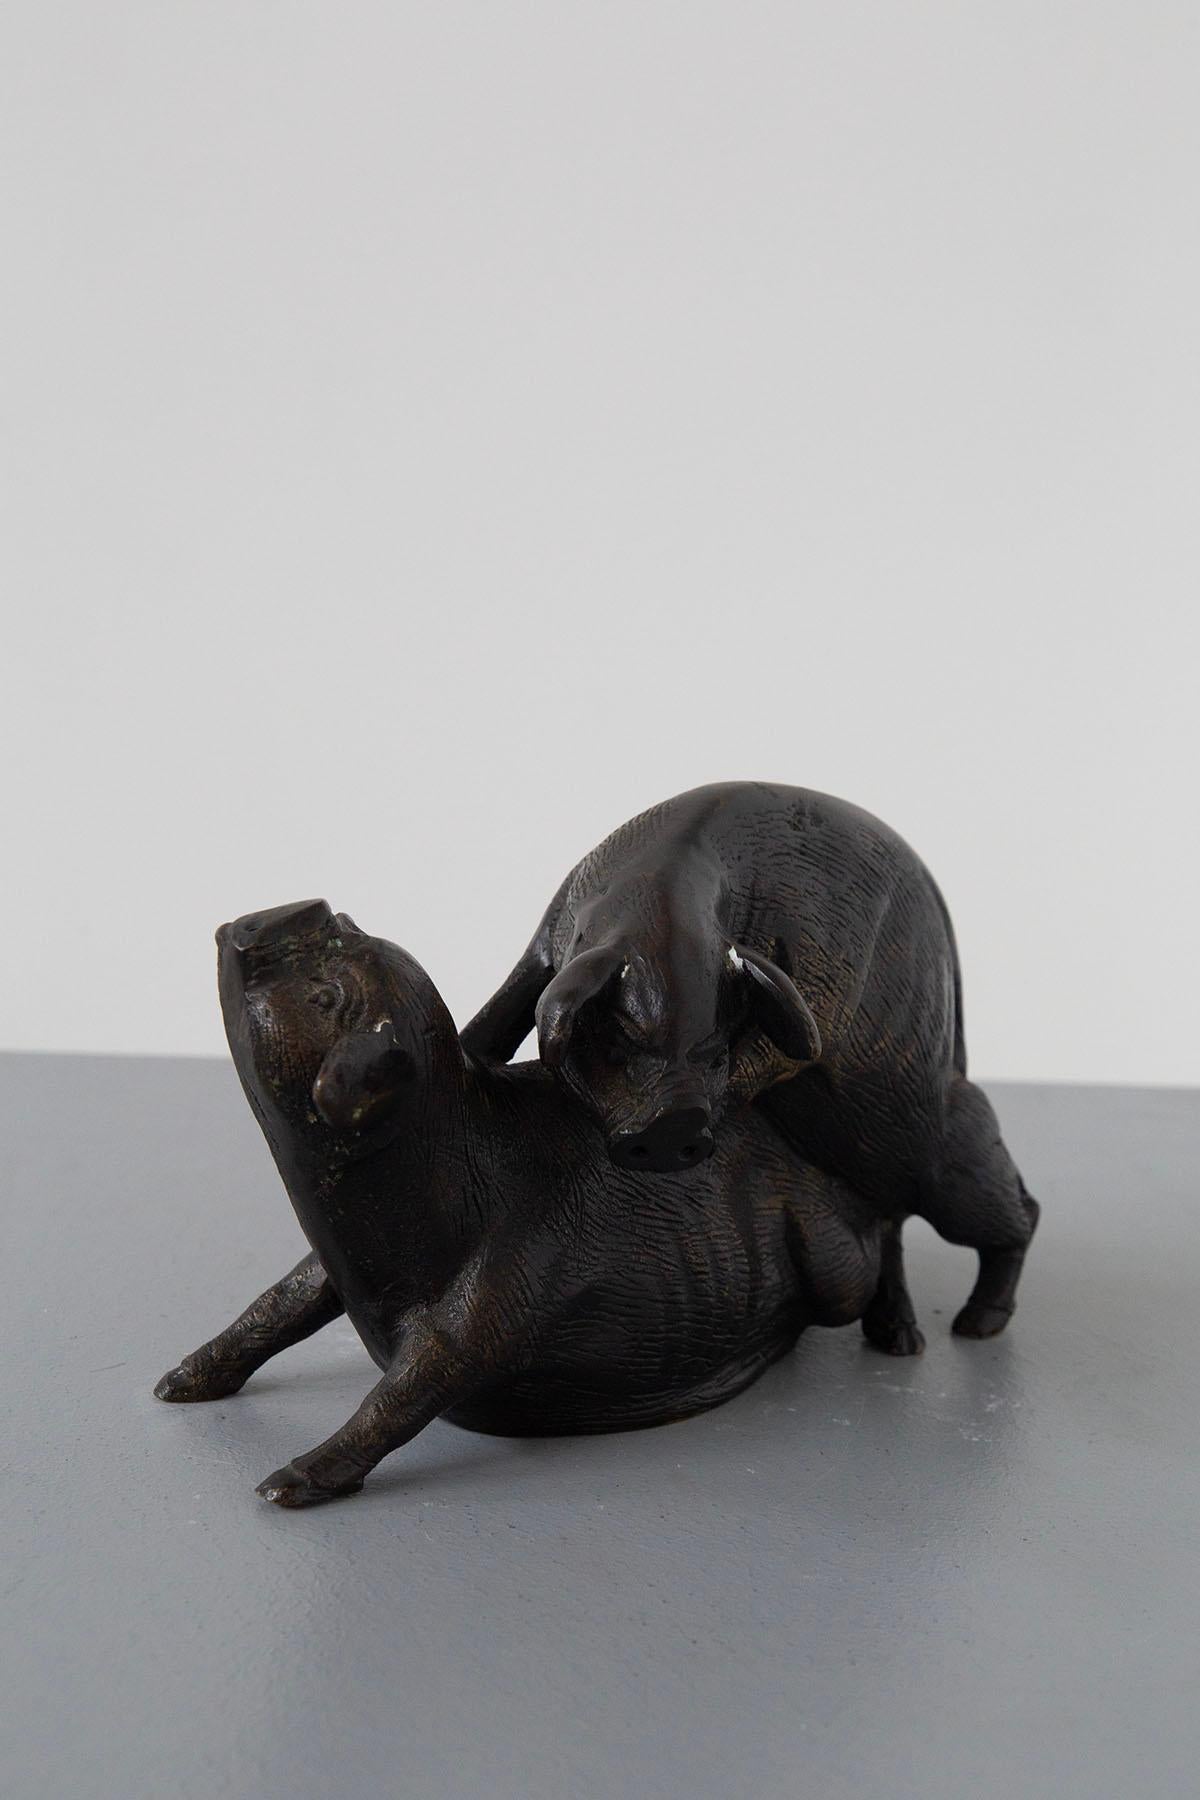 Imagine a small but enchanting Italian bronze sculpture that captures an unexpected moment of nature's beauty. It's a delicate portrayal of Two Mating Pigs, created by a skilled 20th-century bronzist, a testament to the artistry and craftsmanship of